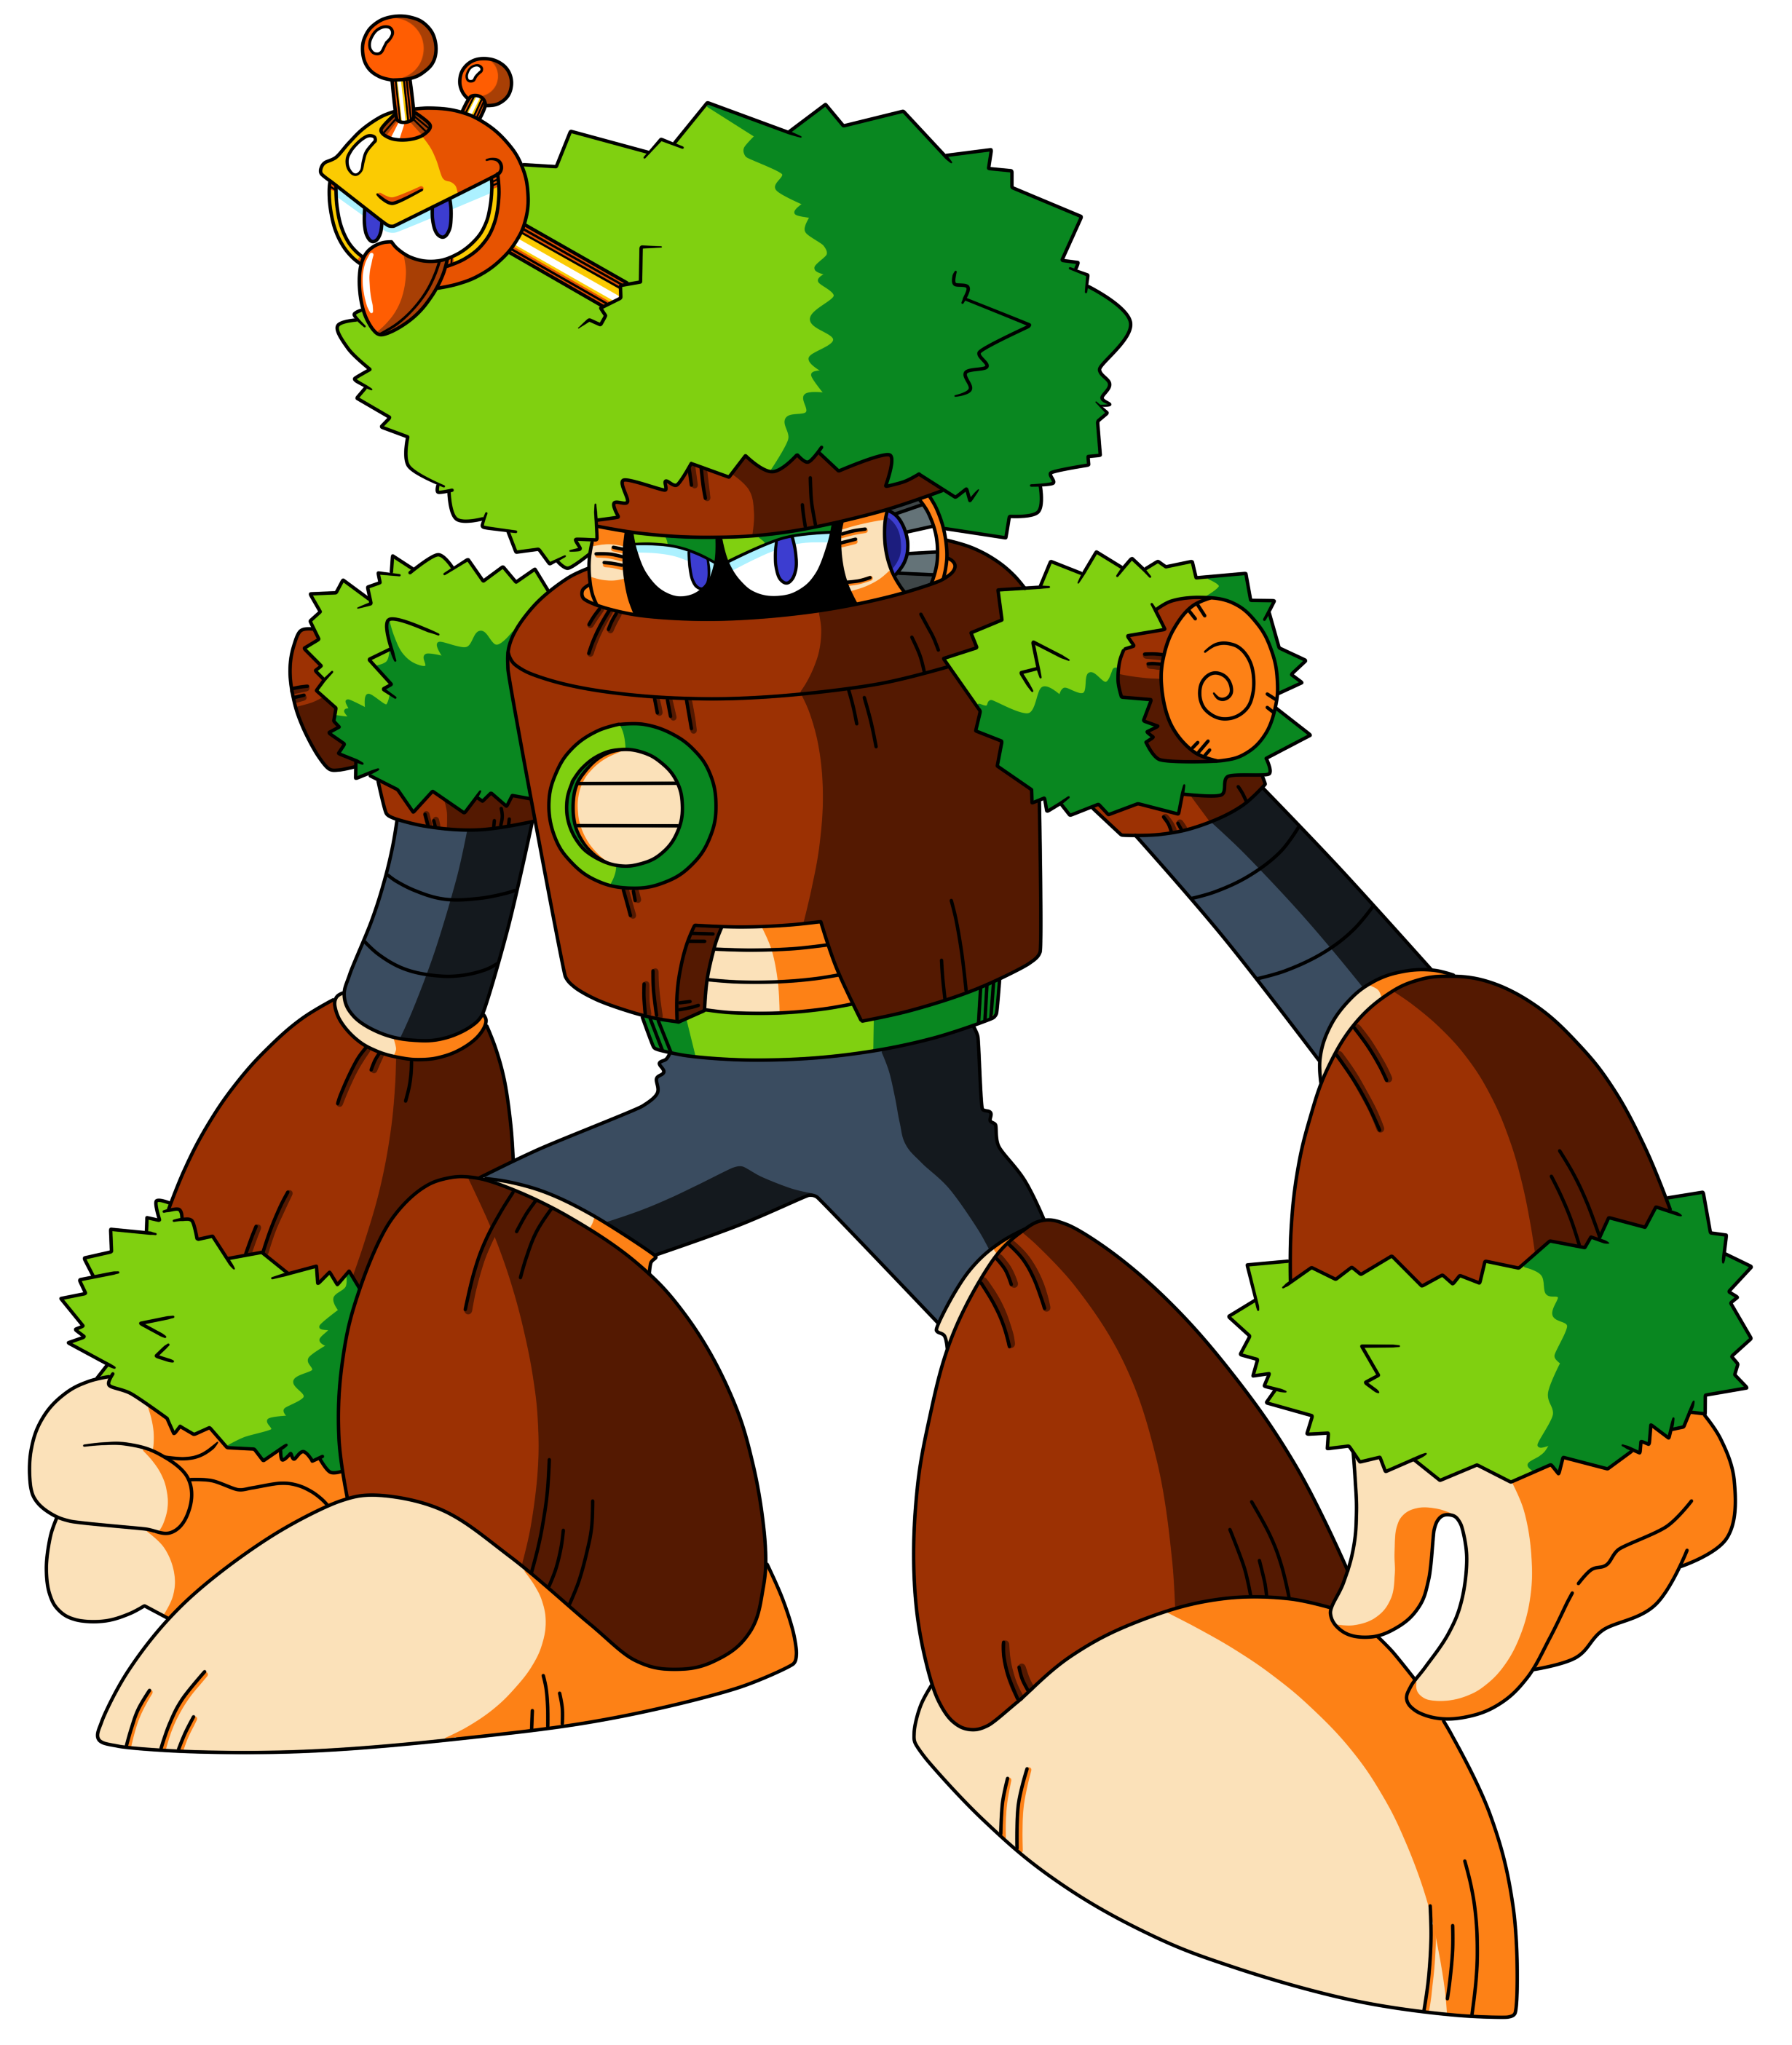 mega_man_tt_s_forest_man_by_justedesserts-d3xqwel.png